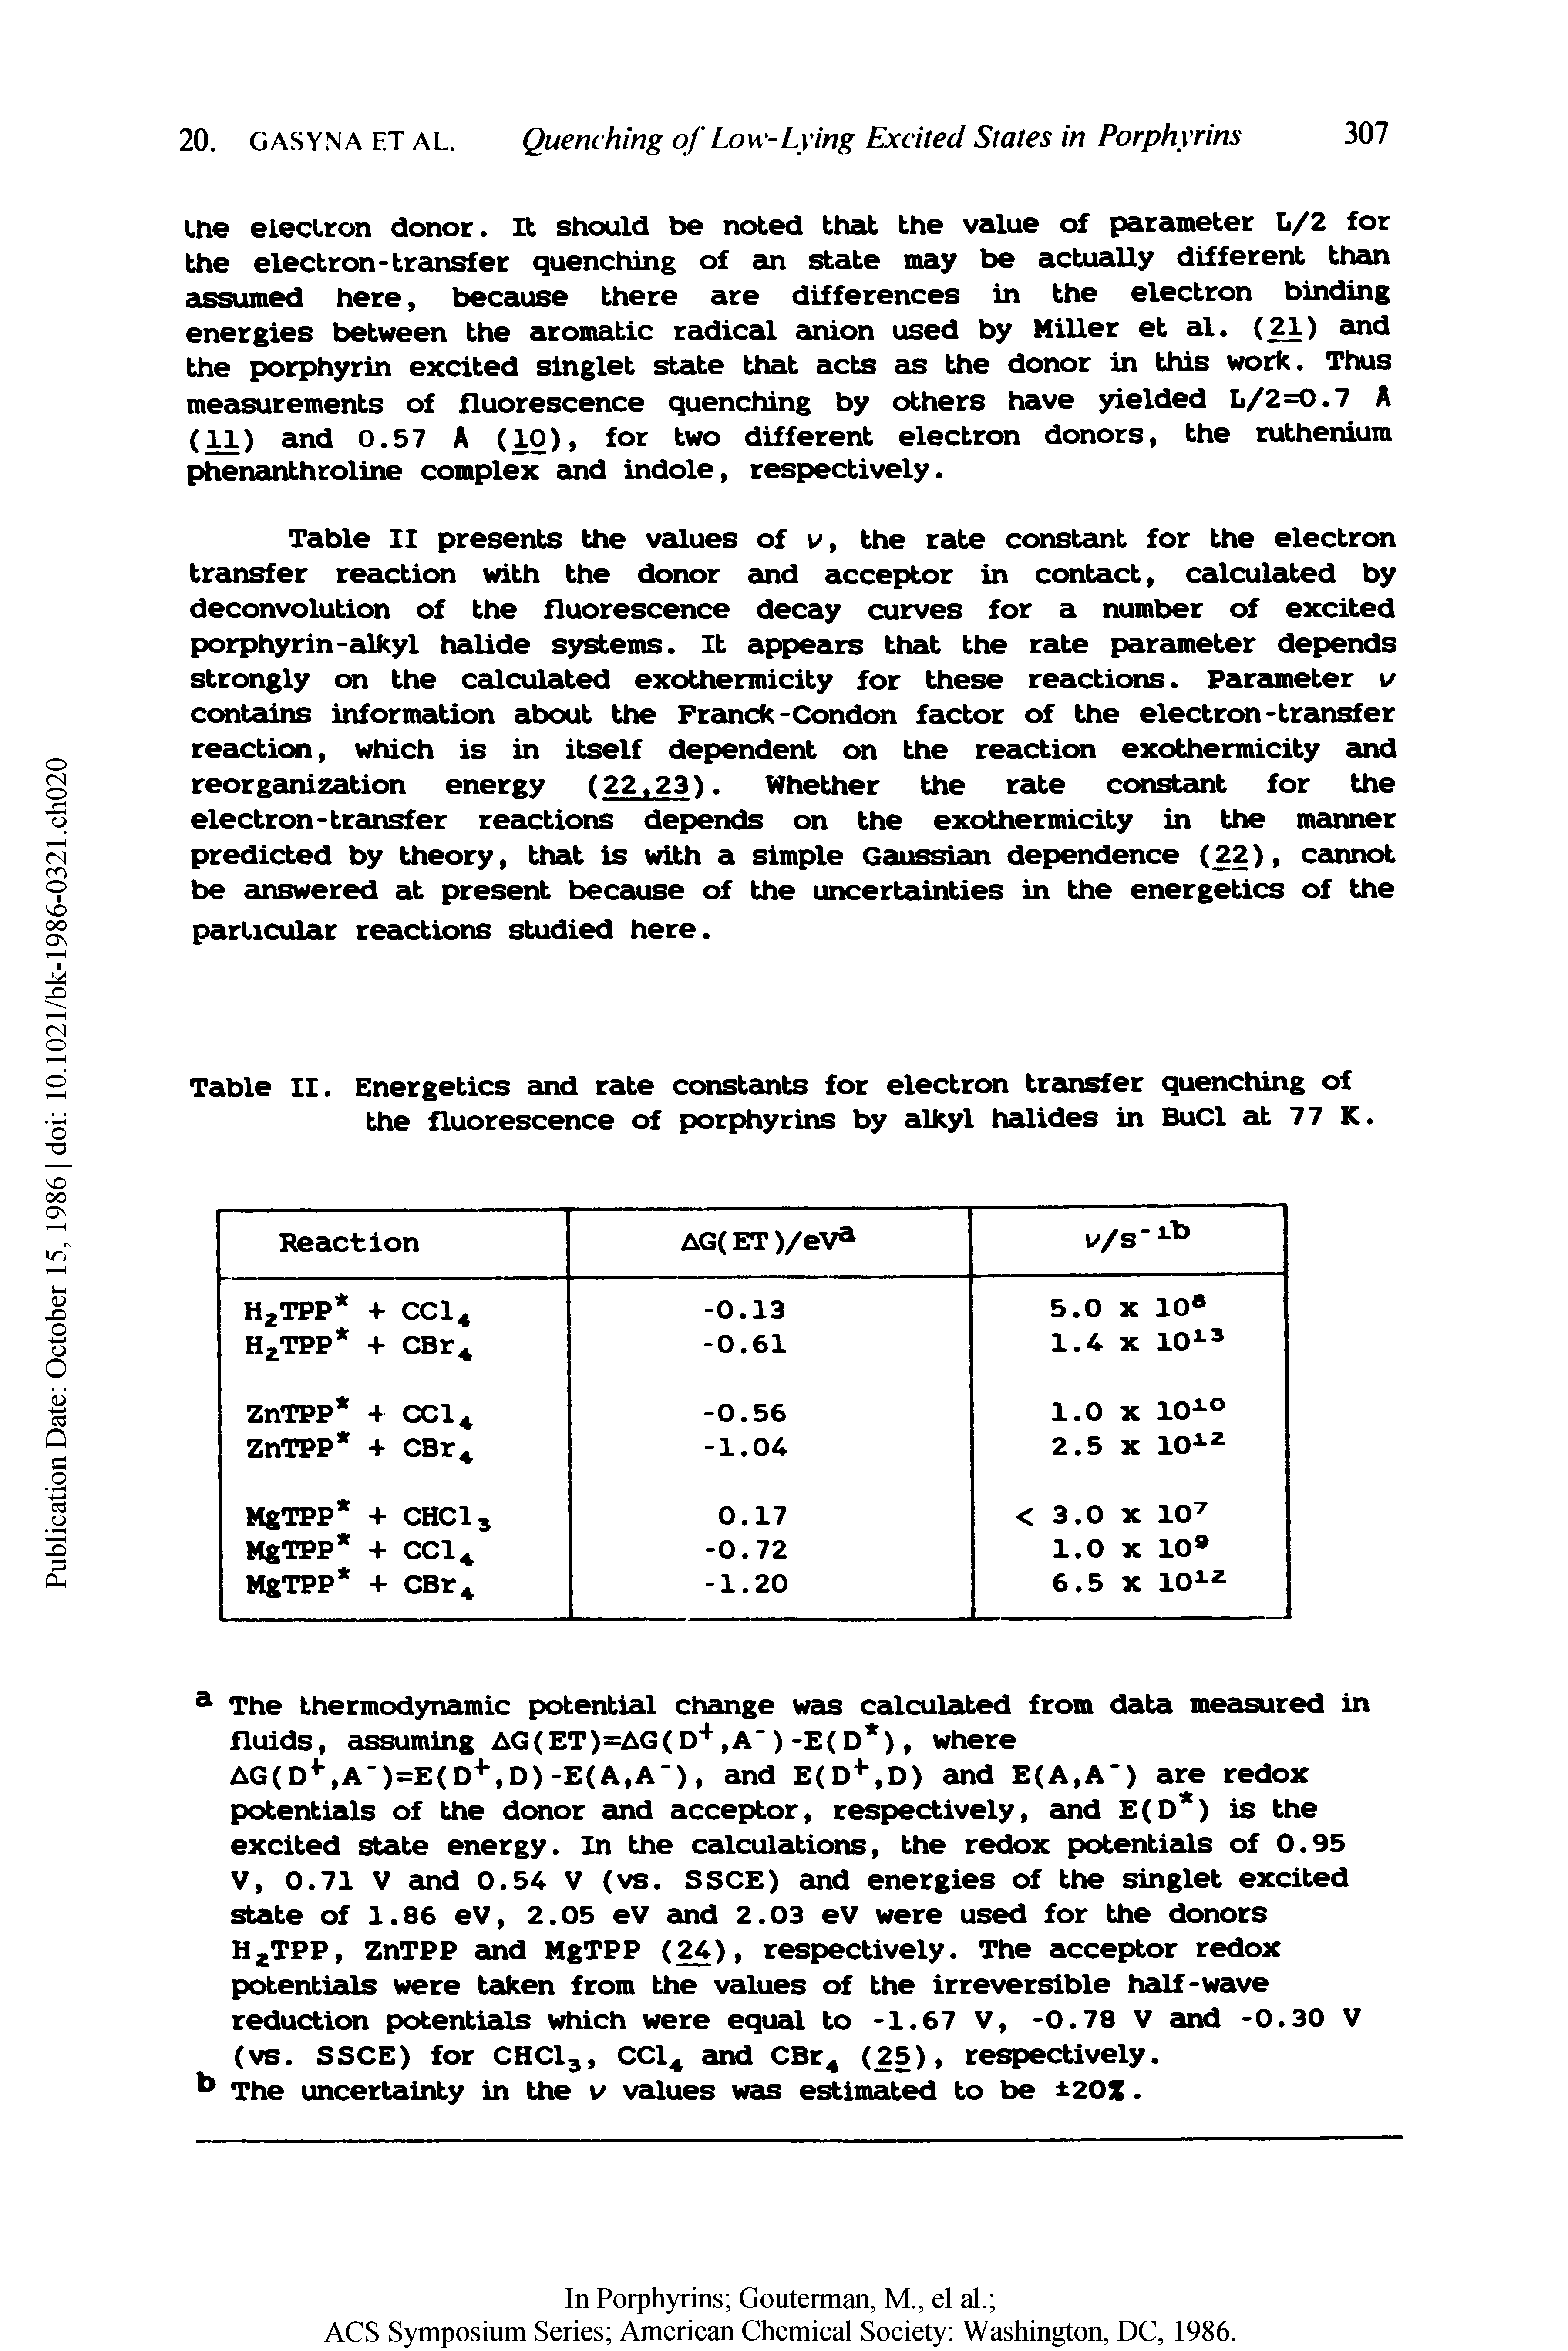 Table II. Energetics amd rate constamts for electron tramsfer quenching of the fluorescence of porphyrins by alkyl halides in BuCl at 77 K.